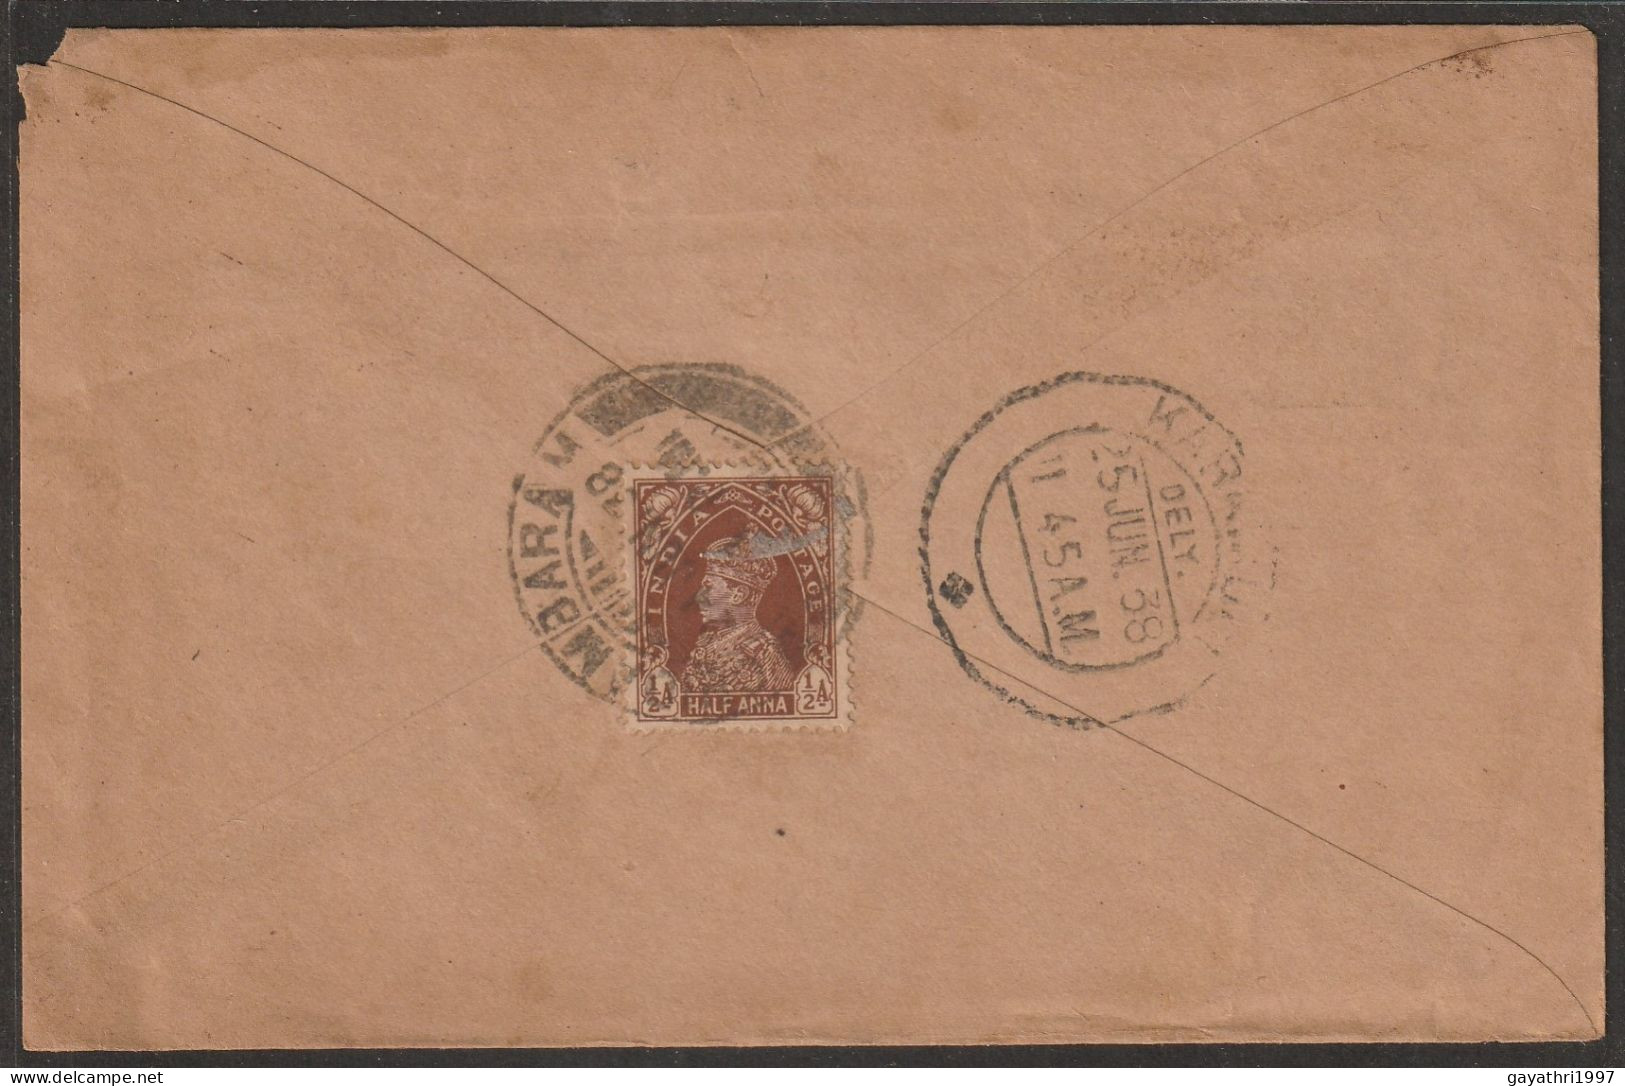 India 1938  K G VI Stamp On Cover From Chidambaram With Printed Hindu God (a71) - Induismo